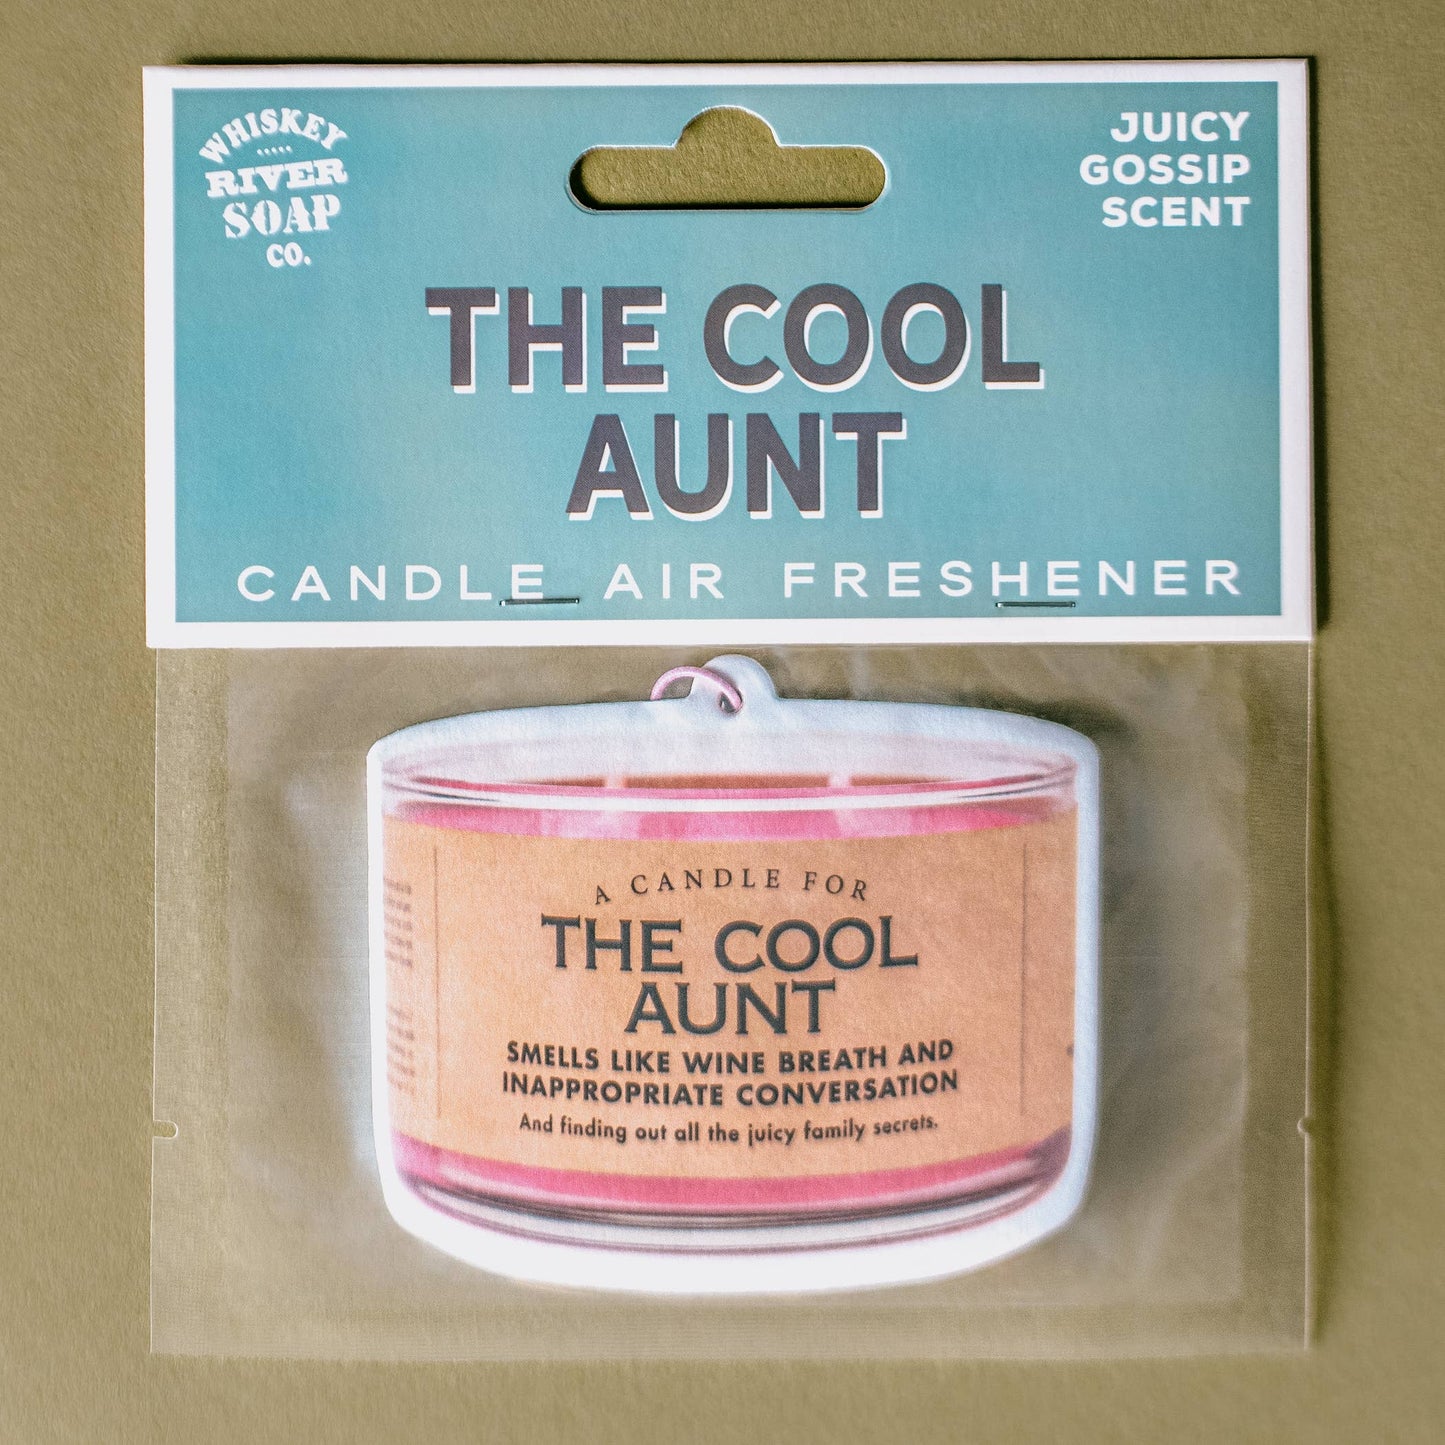 Whiskey River Soap Company The Cool Aunt Air Freshener